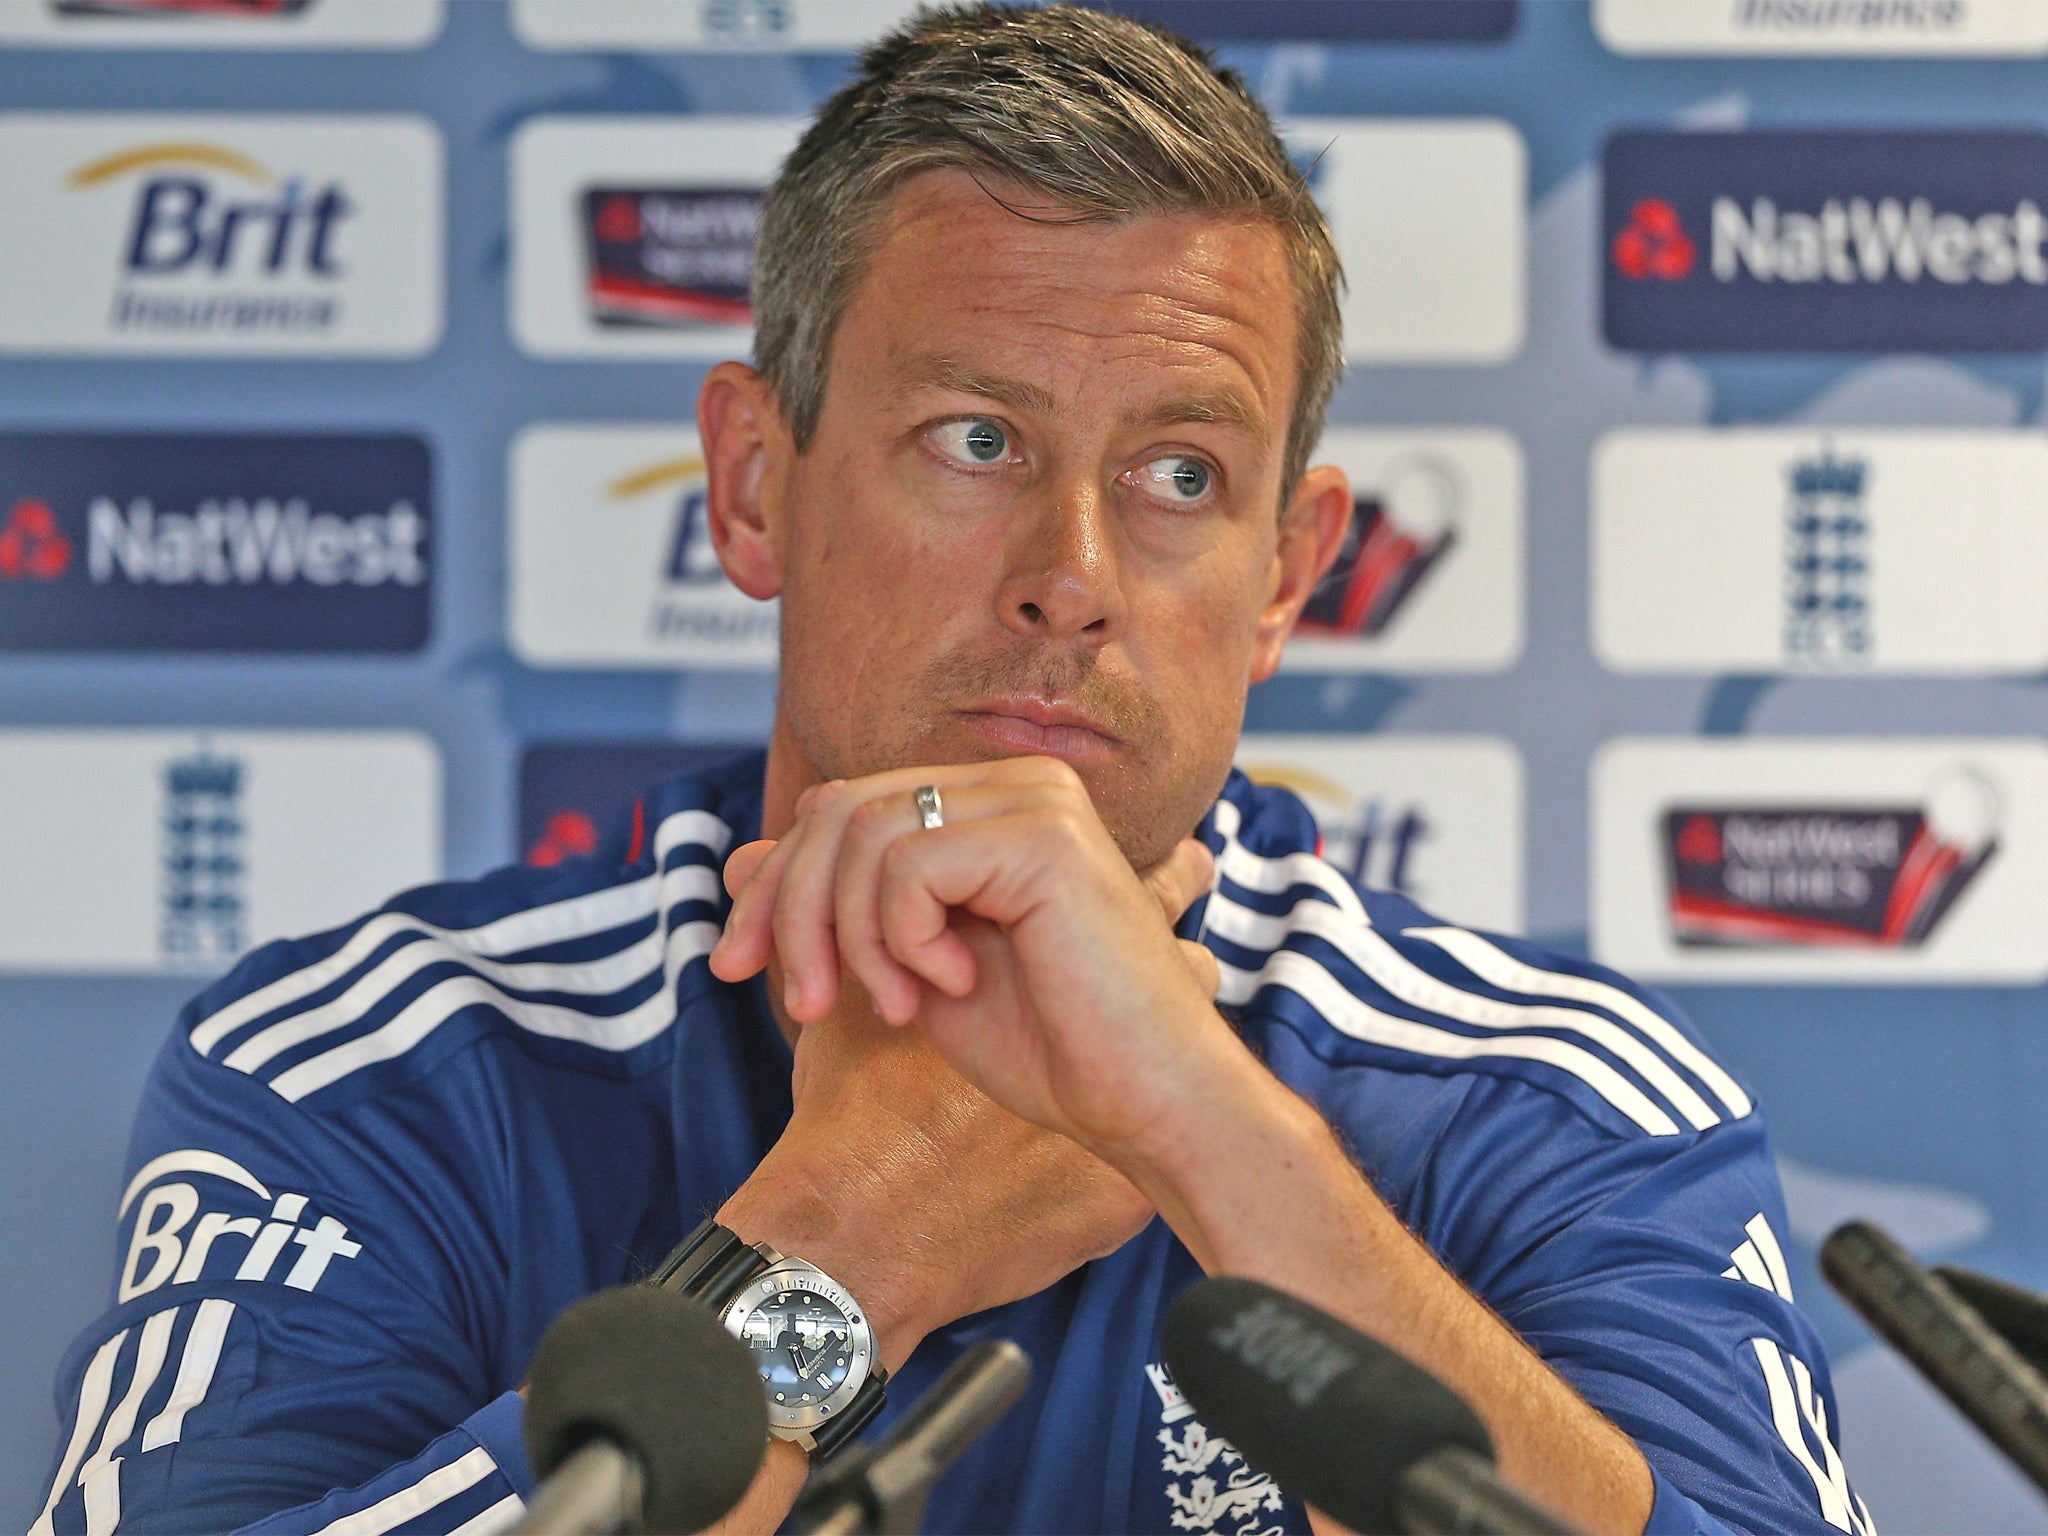 Ashley Giles was not amused at Tuesday’s press conference